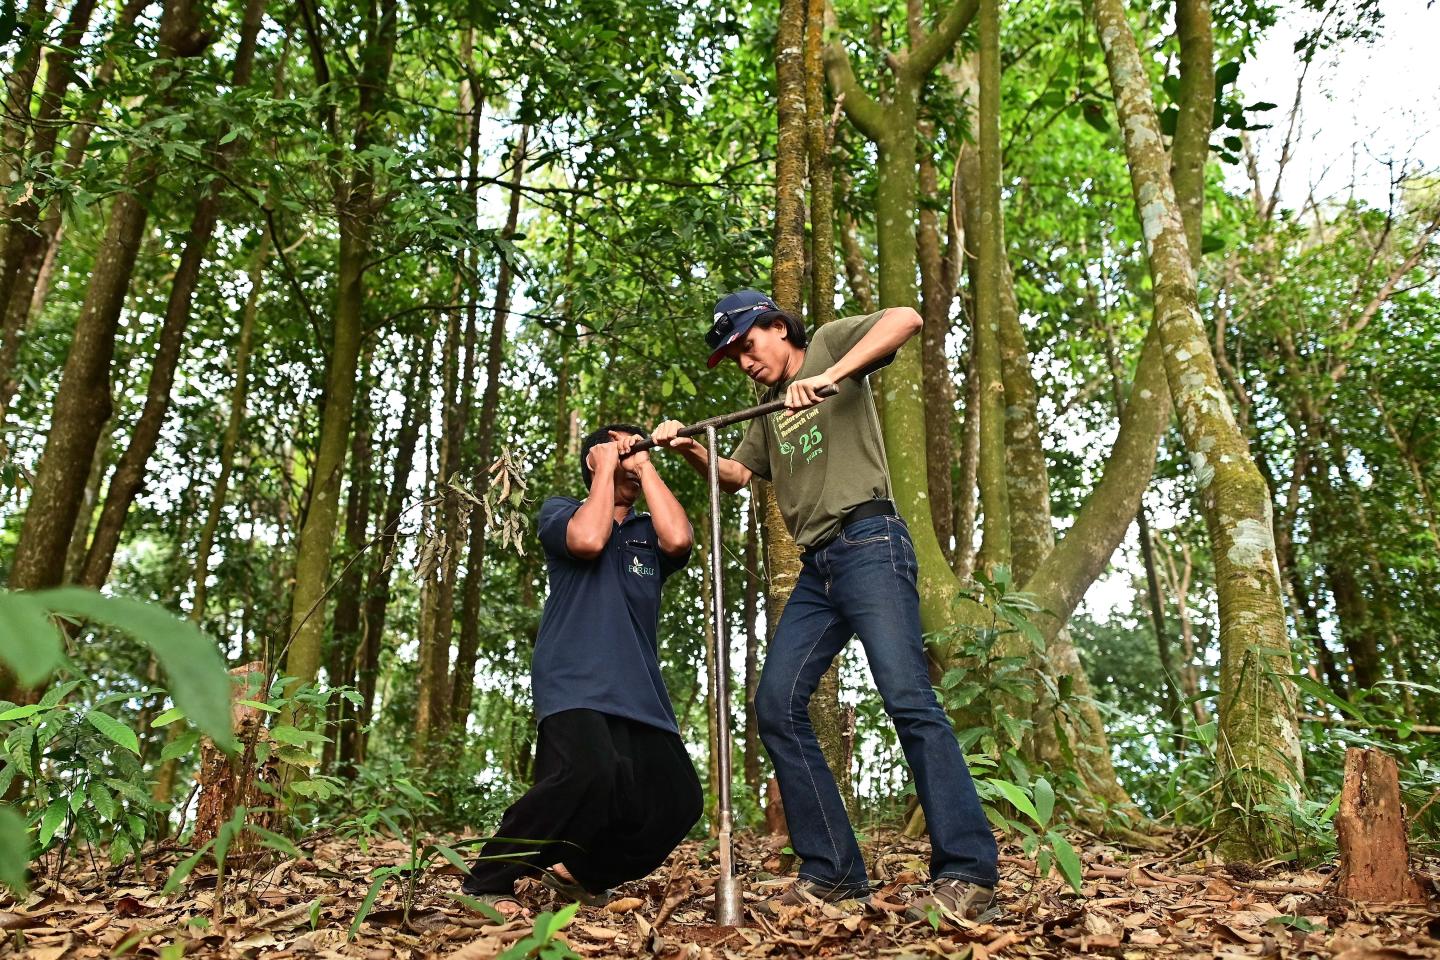 Two people collecting a soil sample with a large metal tool